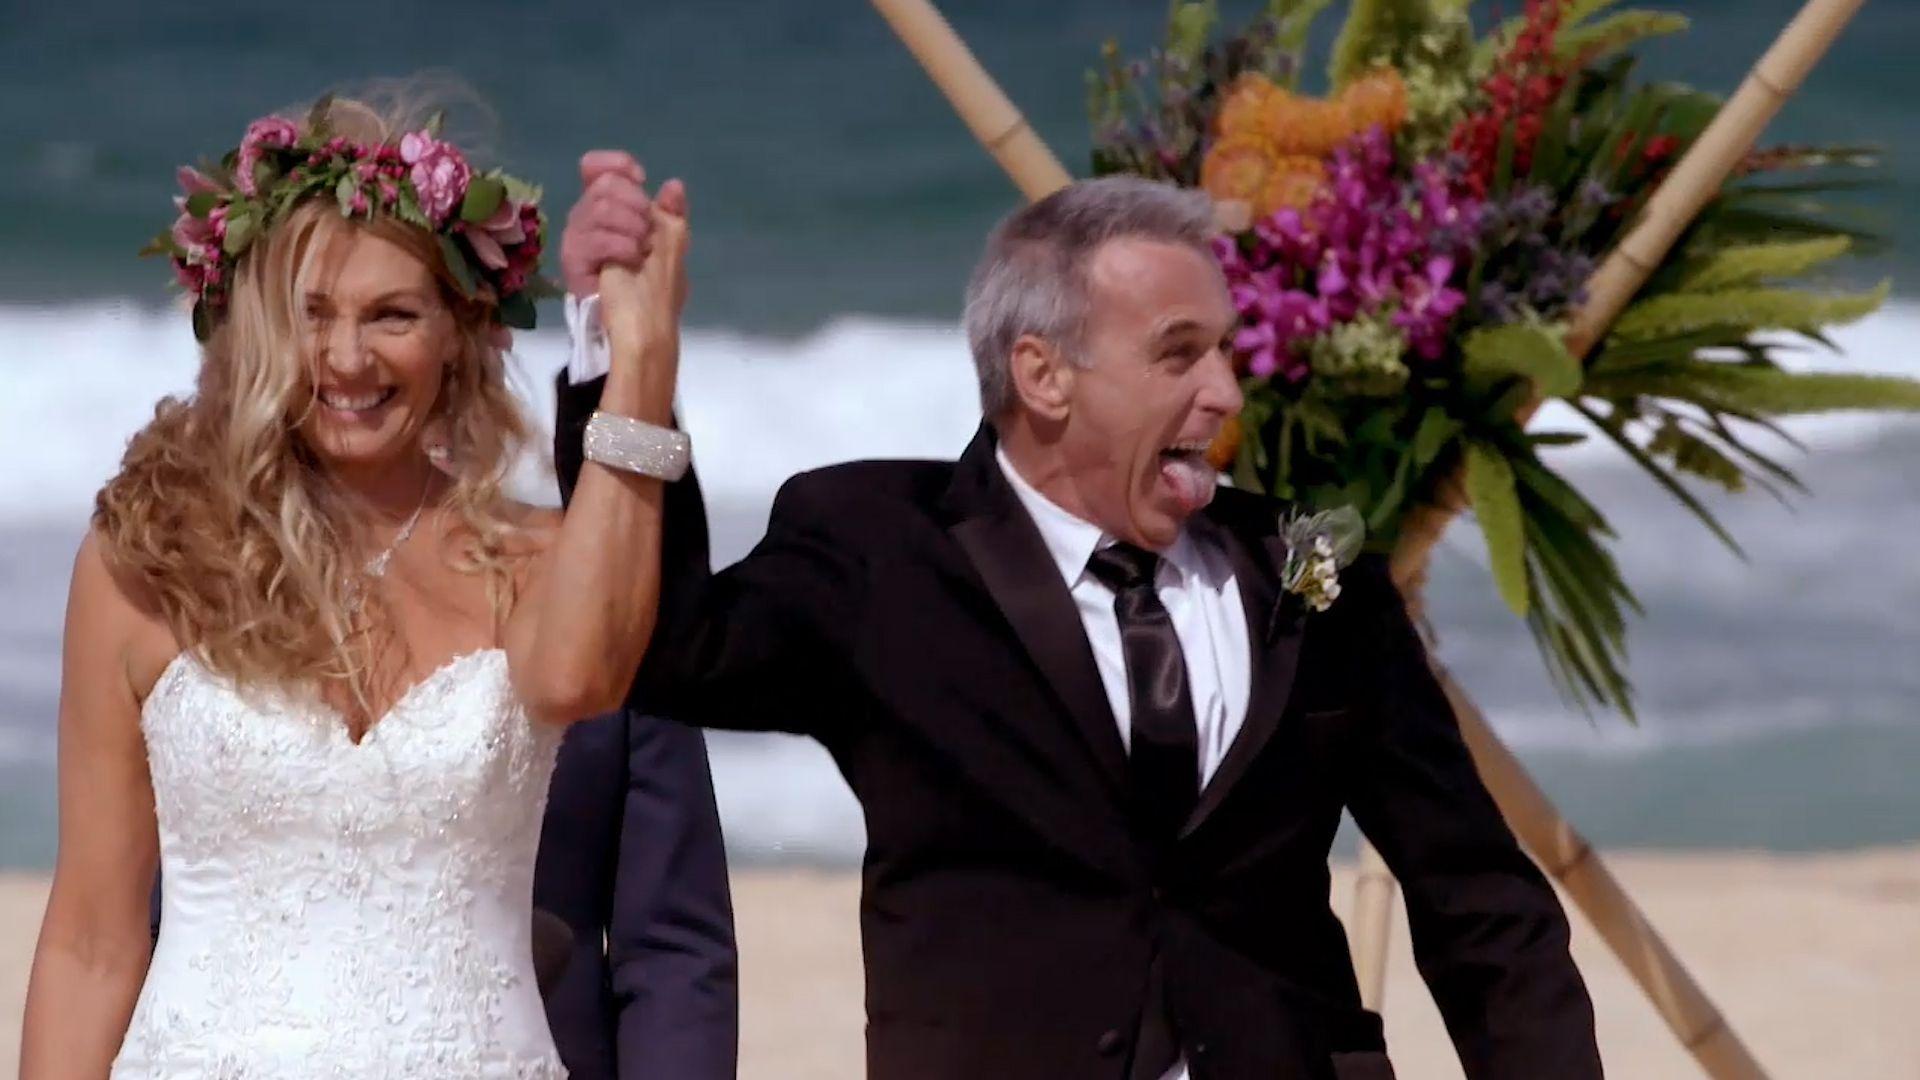 Married At First Sight's John Robertson returns for Season 5